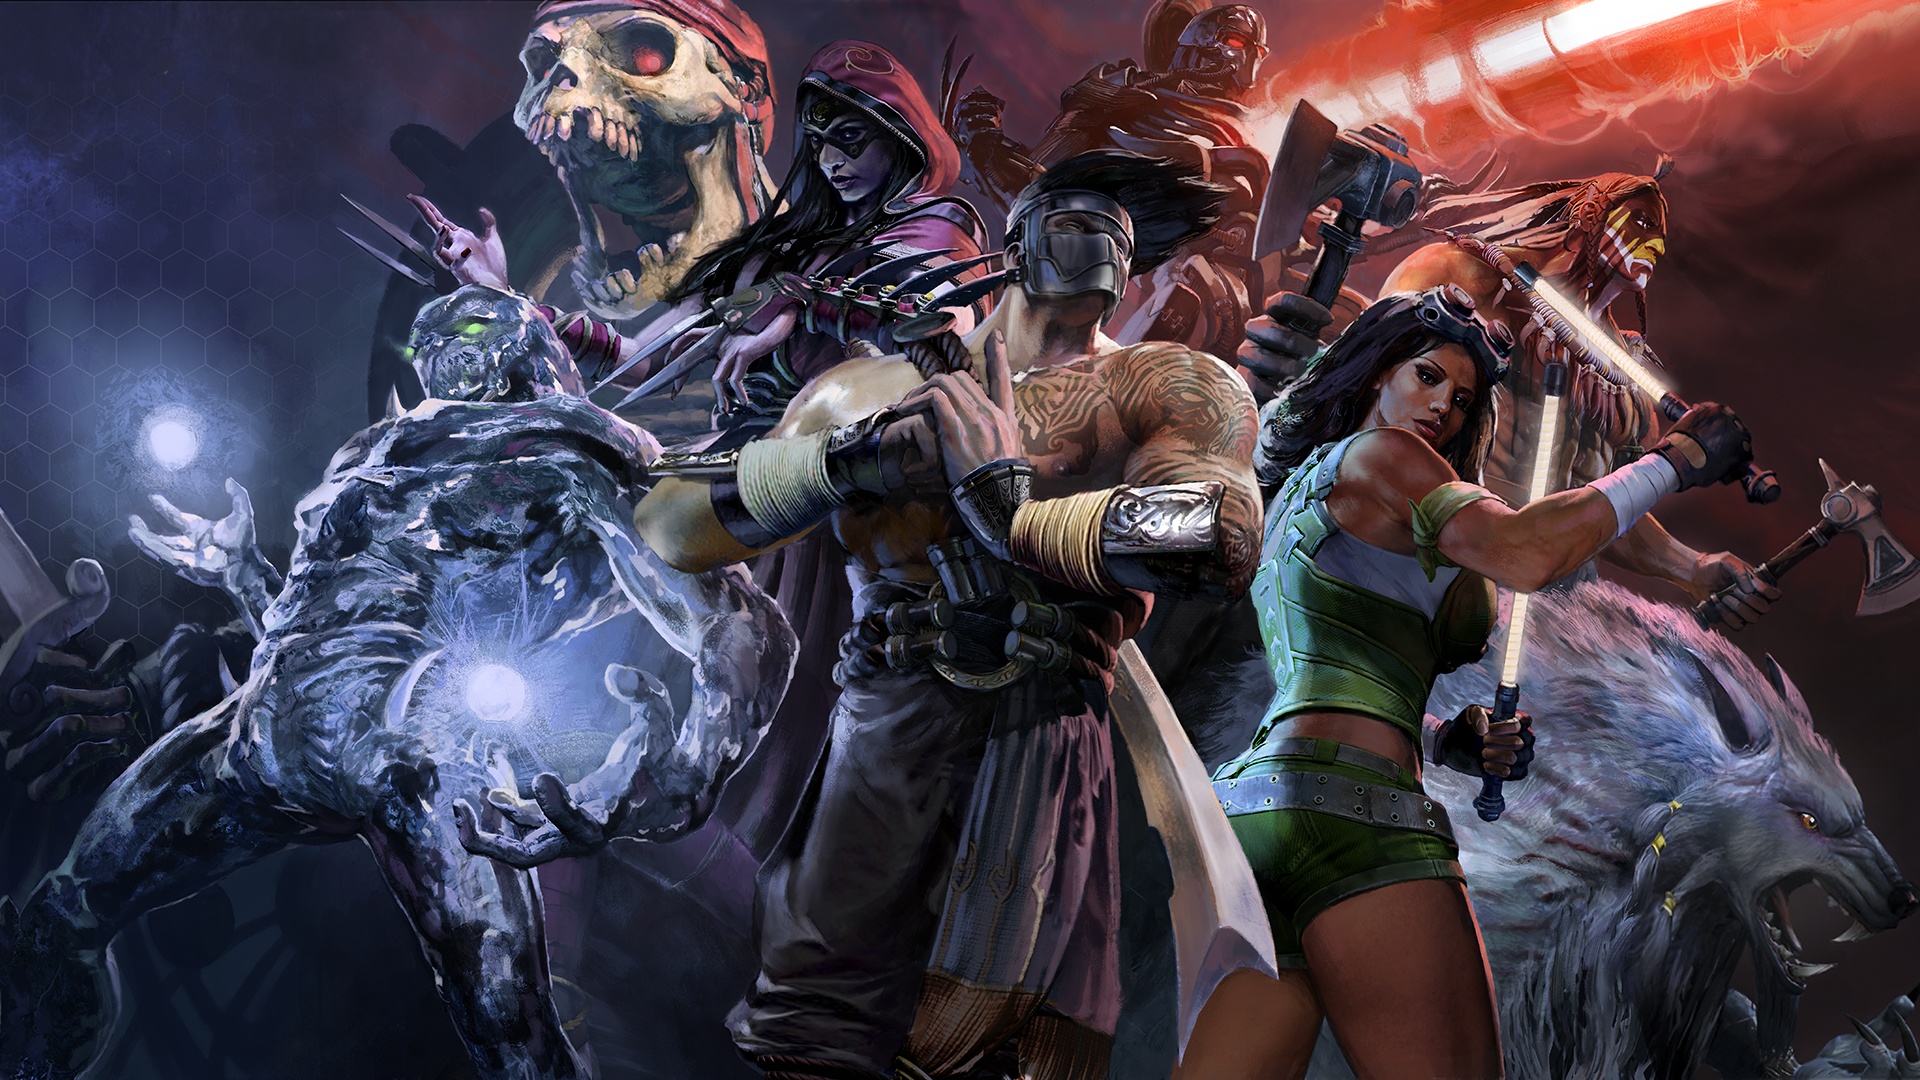 Killer Instinct is getting new content with the Ten Years of Launch Update